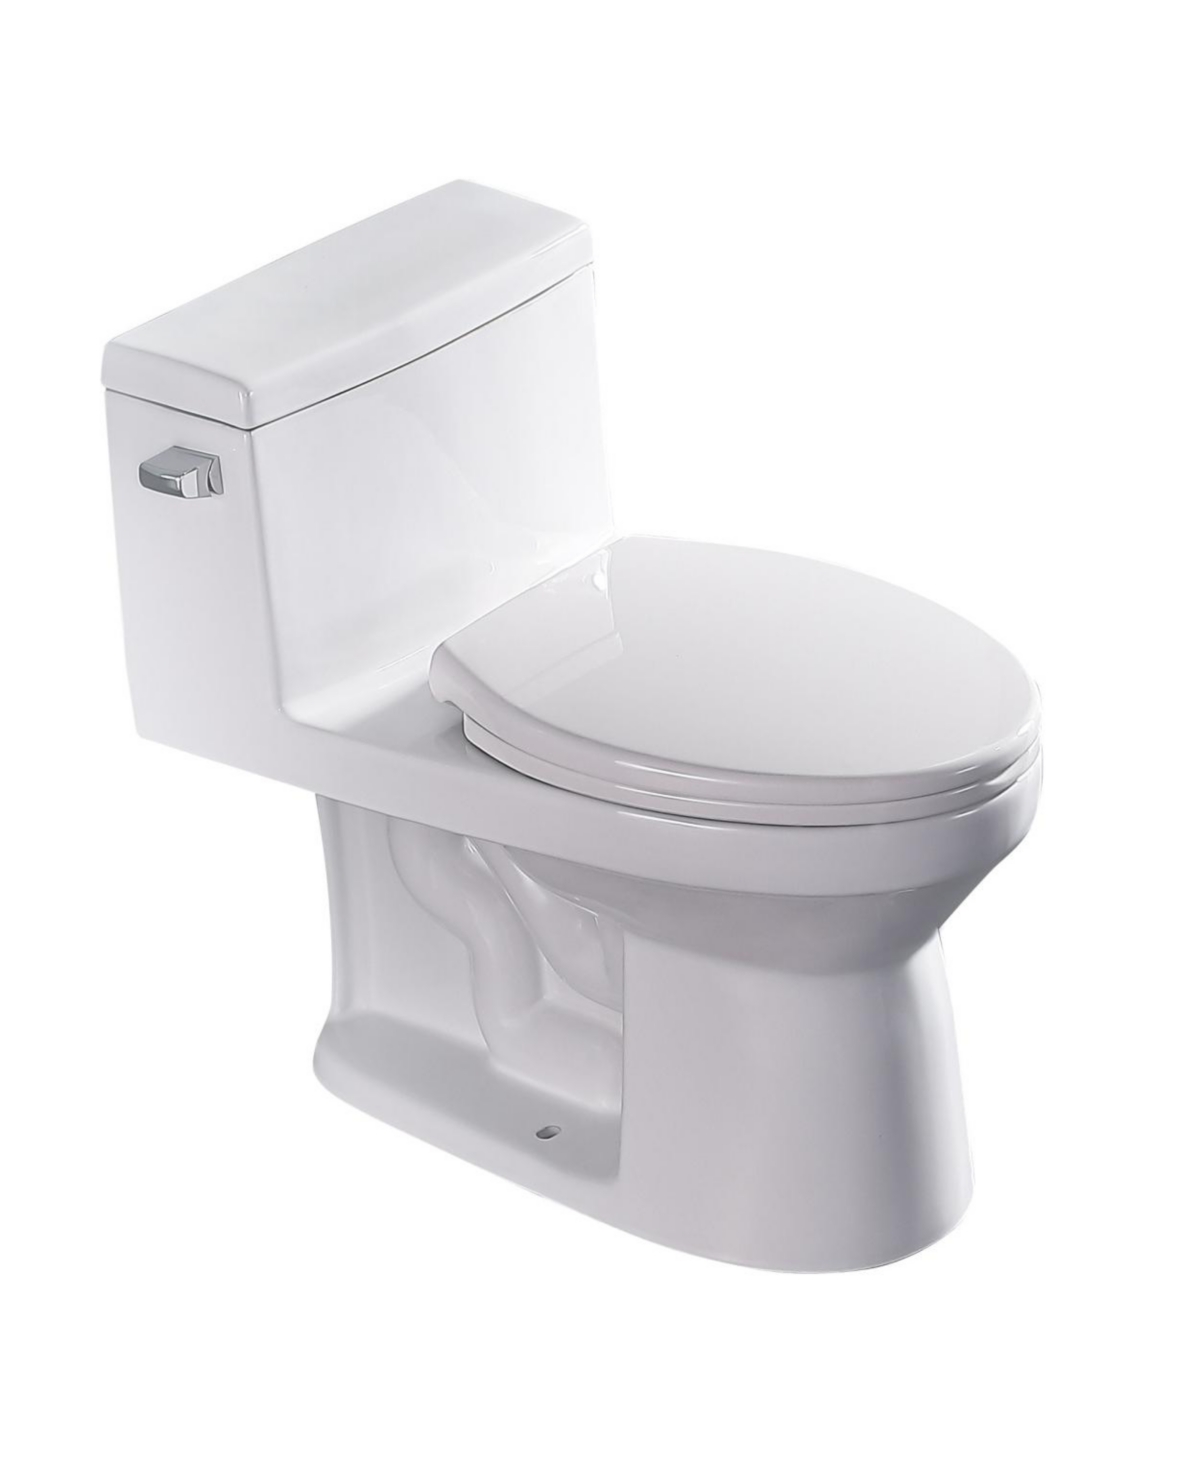 Ceramic One Piece Toilet, Single Flush With Soft Closing Seat - White